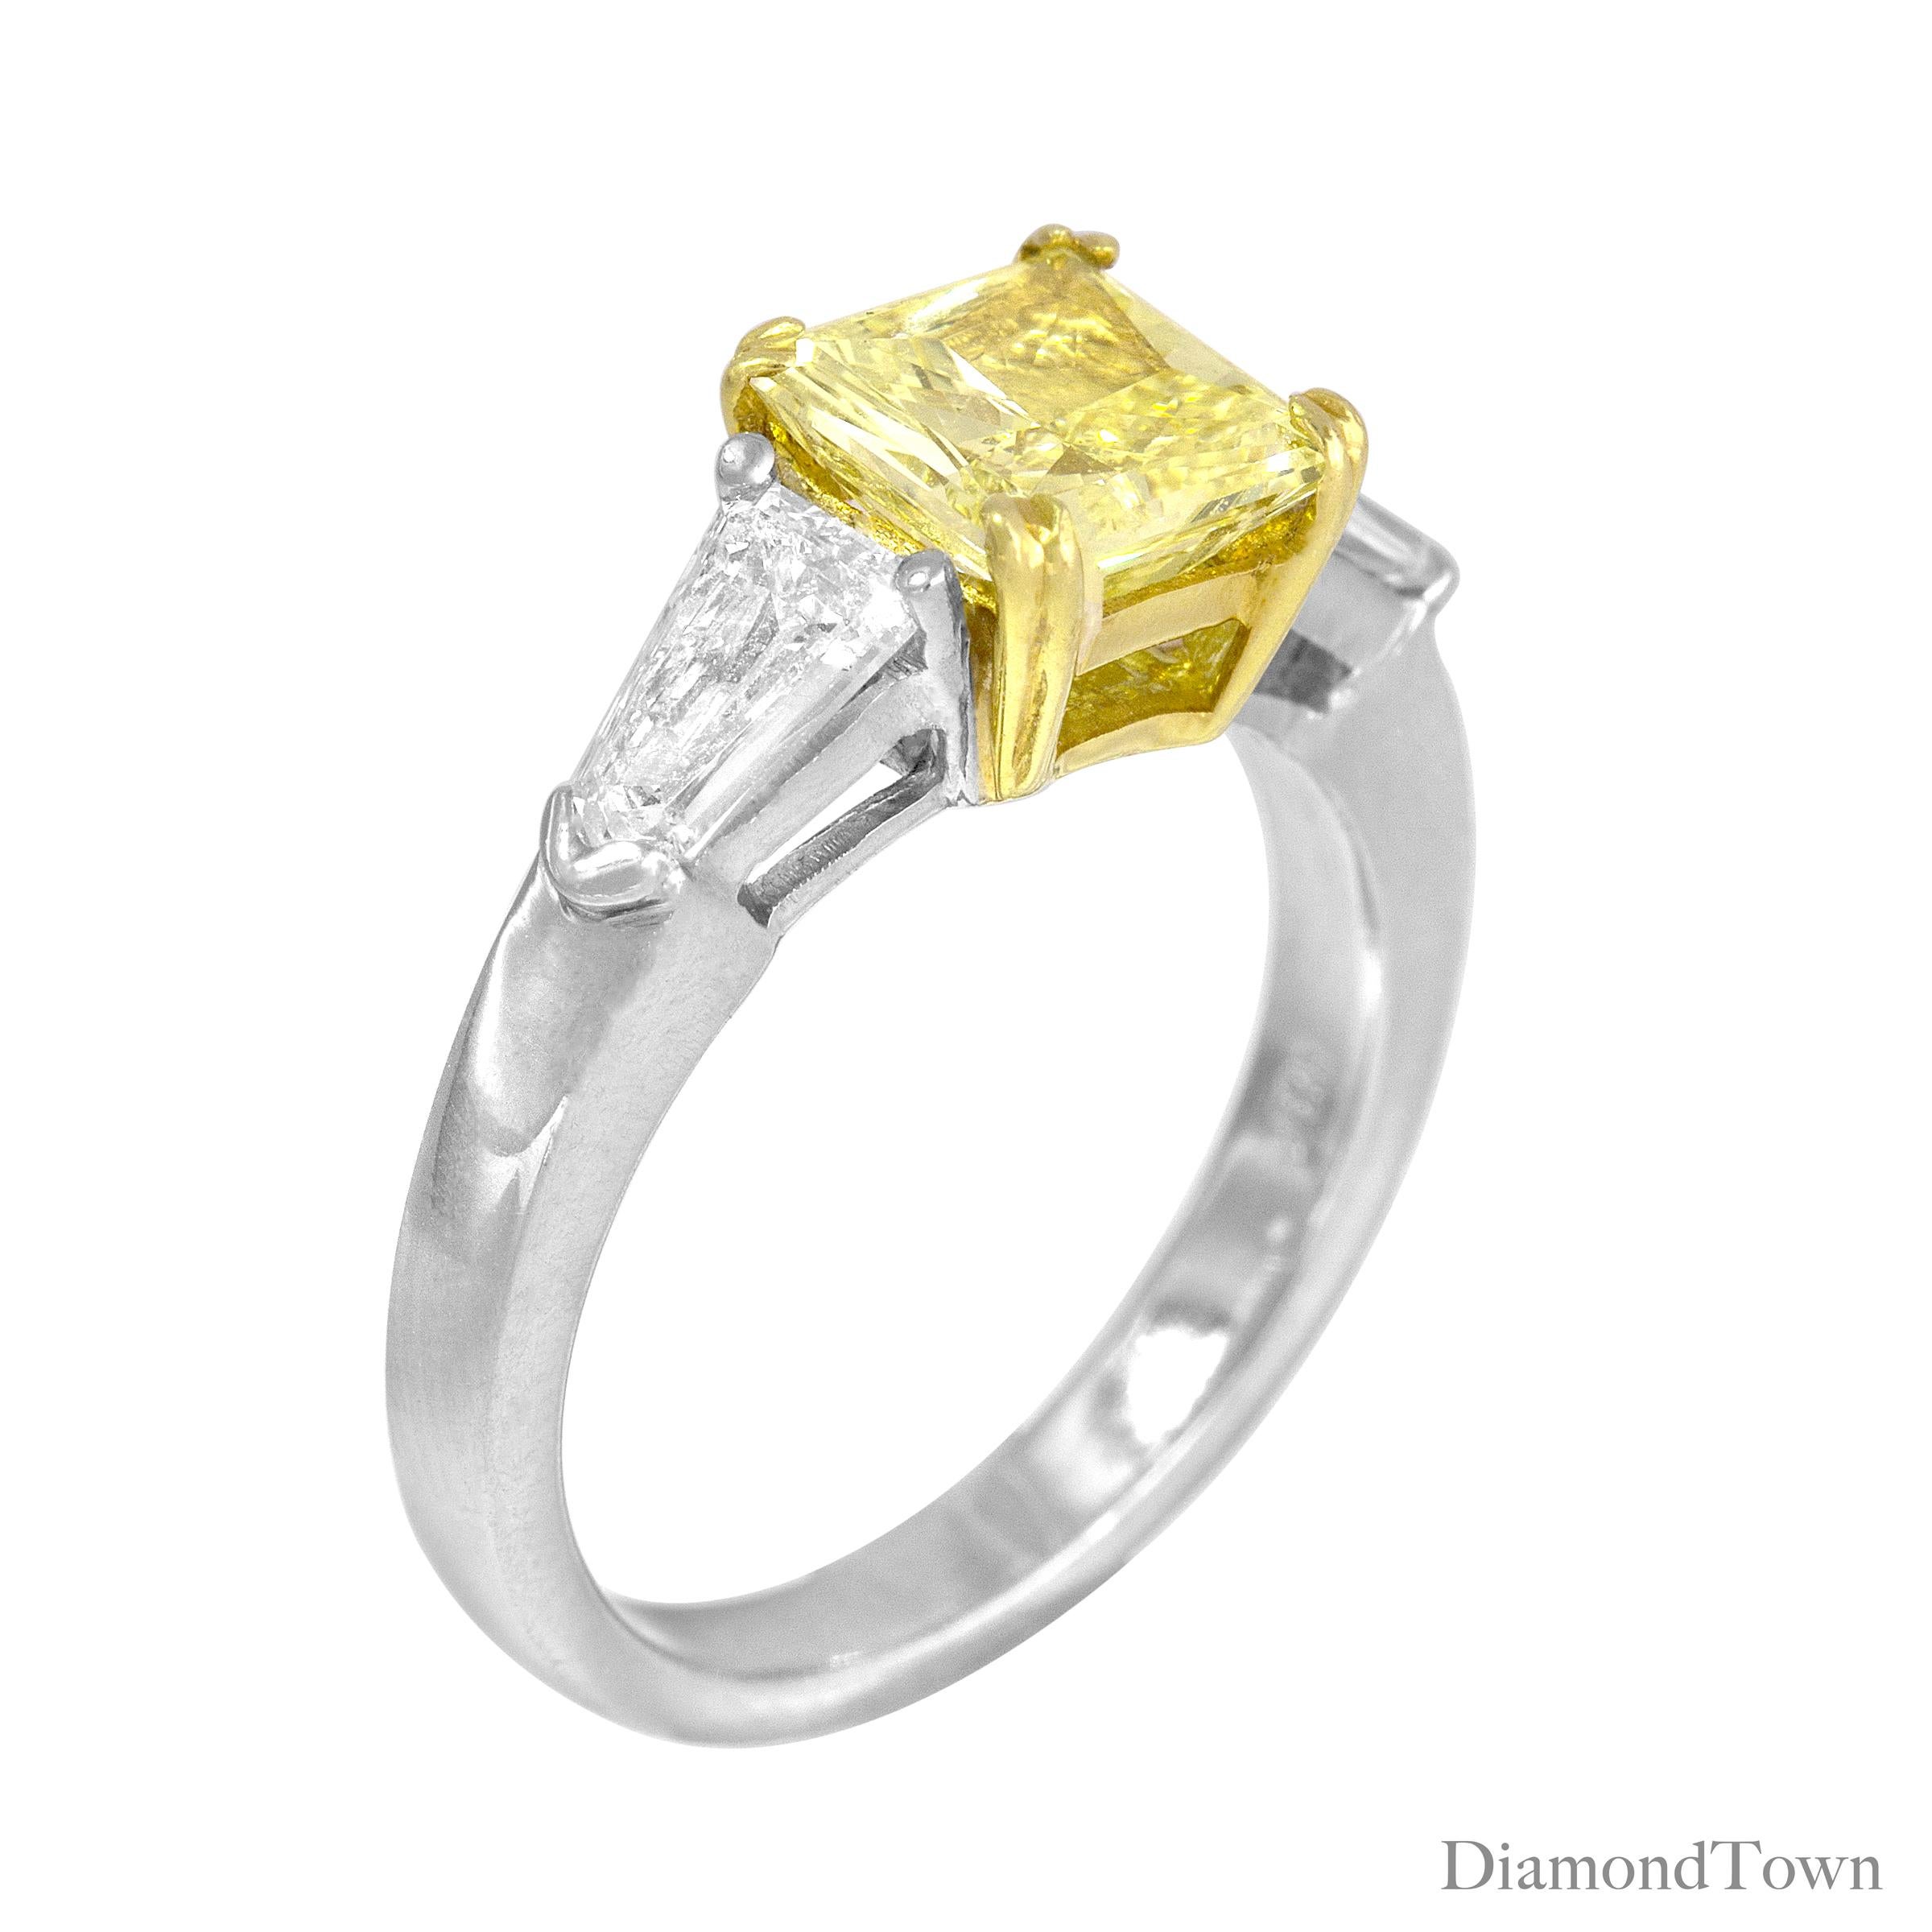 This magnificent ring features a GIA Certified Square Modified Brilliant 1.08 Carat Fancy Light Yellow Diamond, radiating with mesmerizing allure from the heart of this exquisite ring. The sheer elegance of this centerpiece is further accentuated by